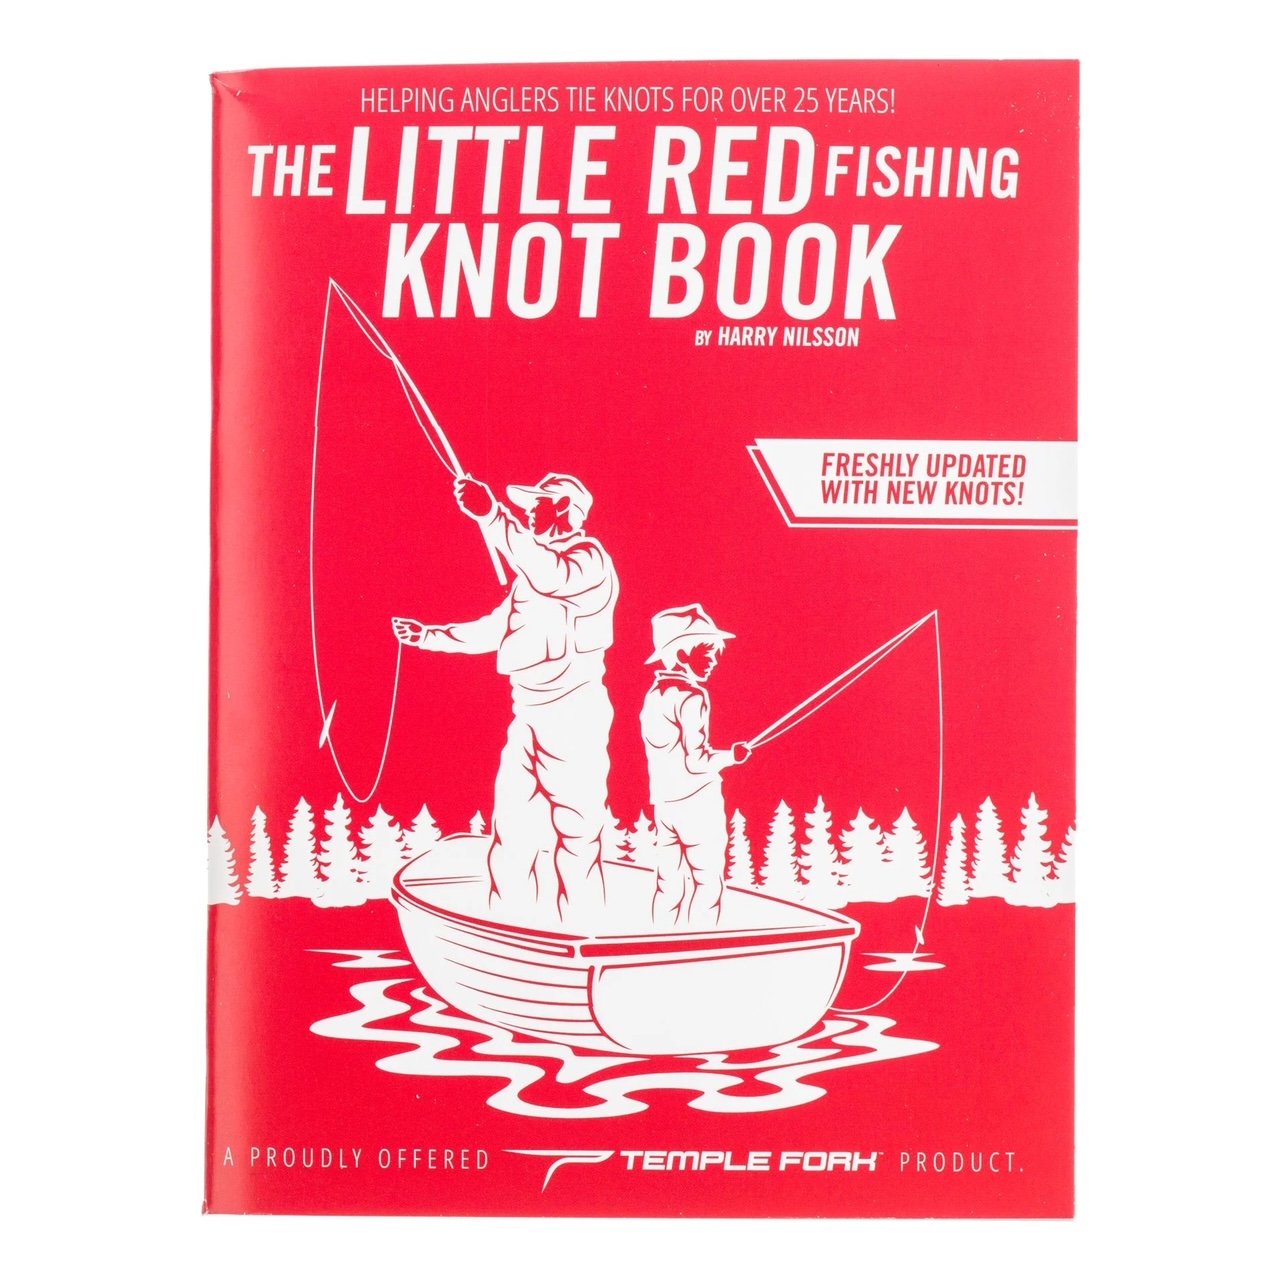 The Little Red Fishing Knot Book - by Harry Nilsson